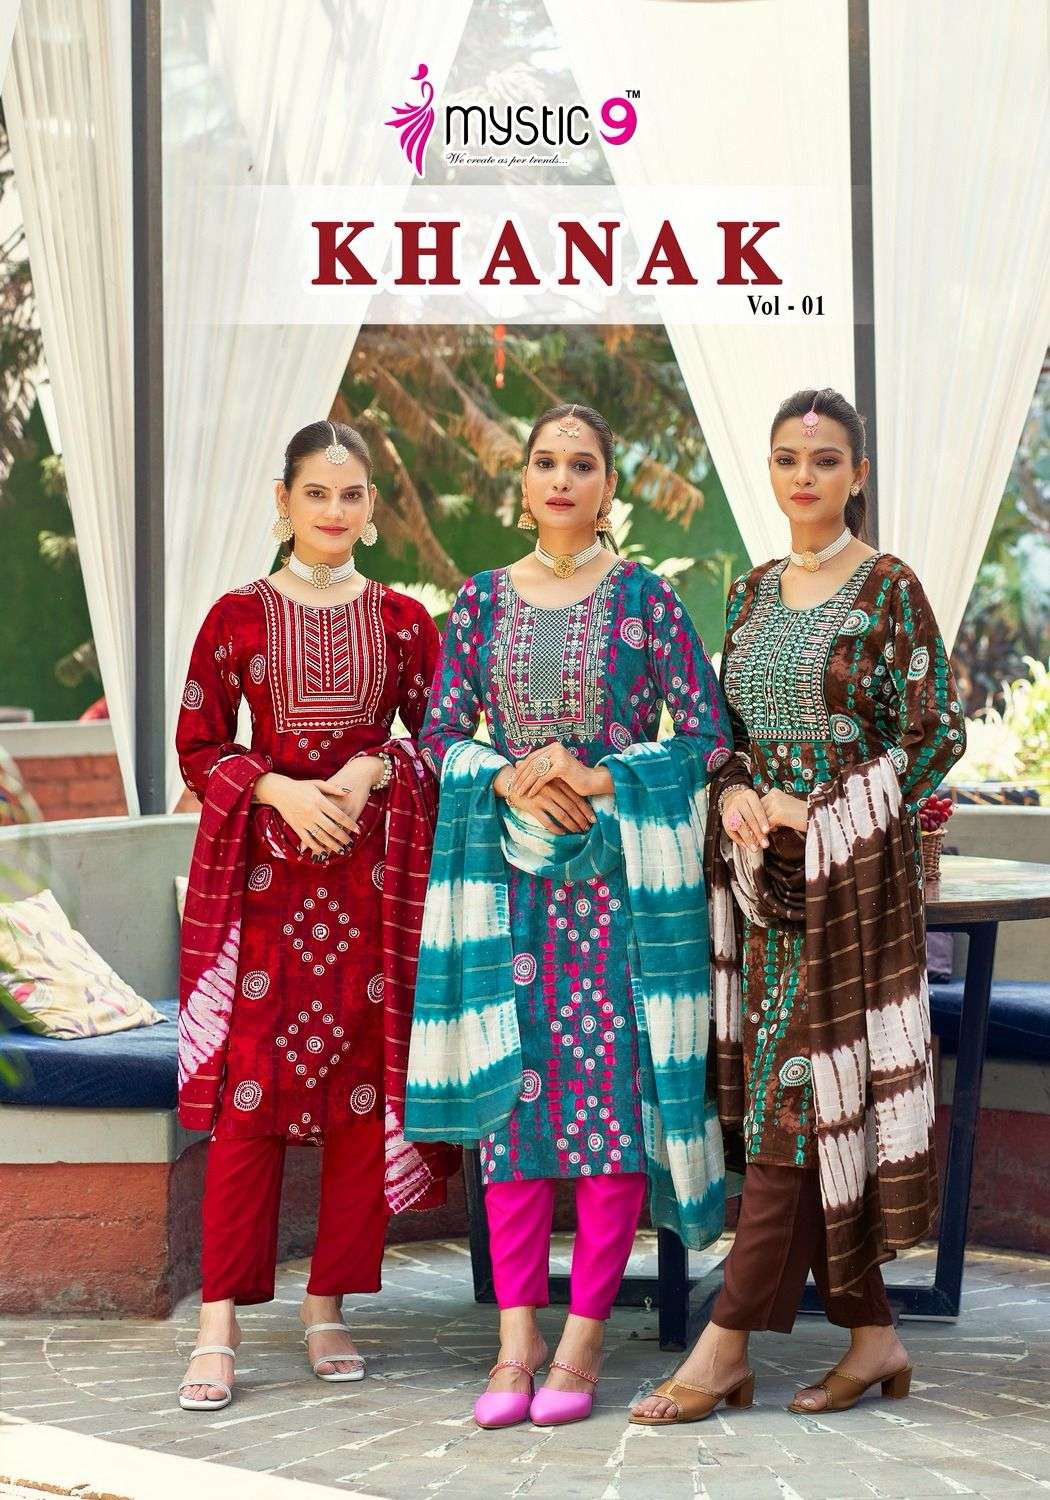 KHANAK RAYON PRINT EMBROIDERY WORK KURTI WITH PANT AND NAZMIN TIE DIE DUPATTA BY MYSTIC 9 BRAND WHOL...